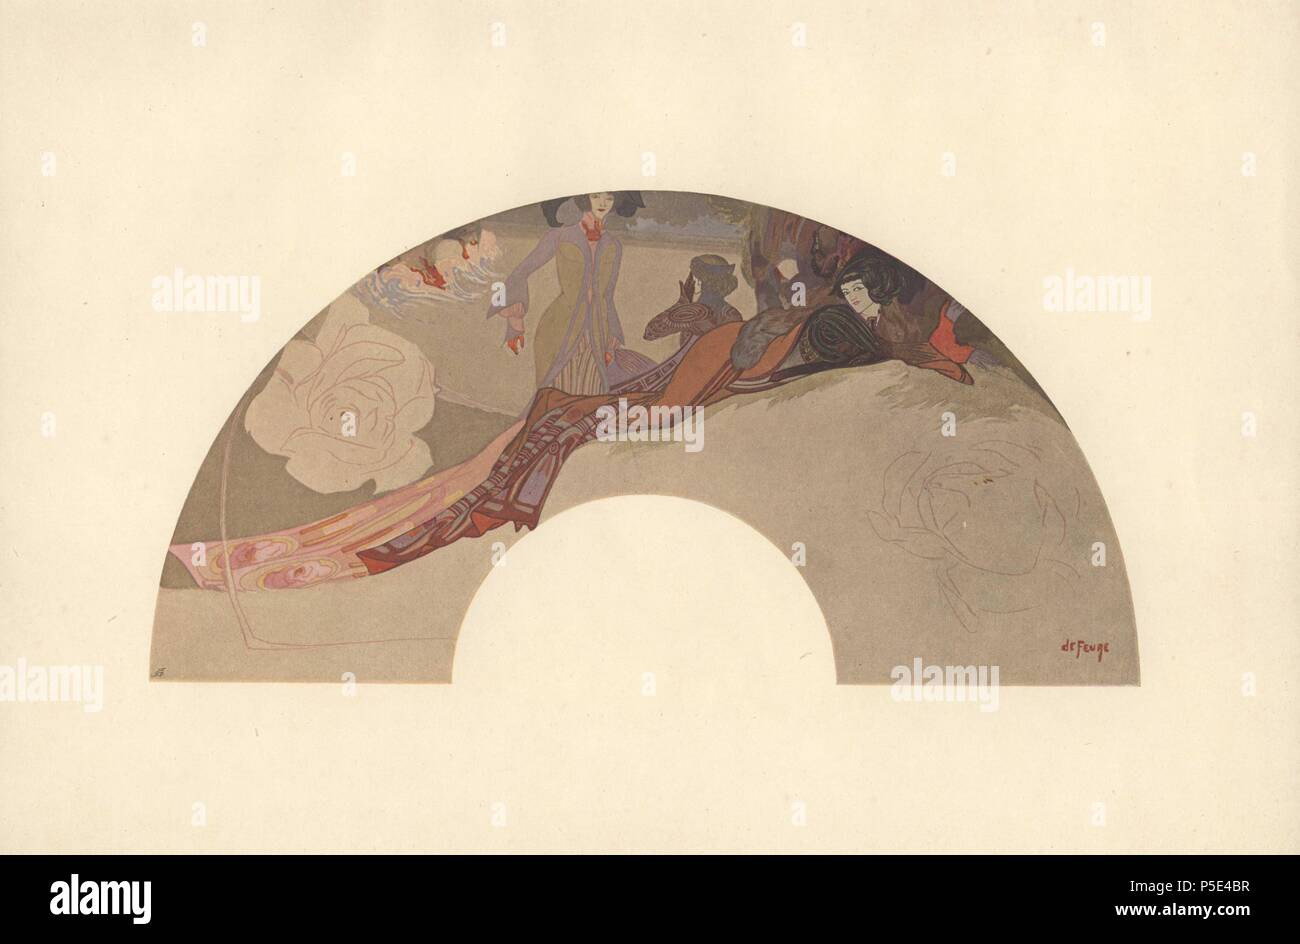 French art nouveau fan design by Georges de Feure (1868-1943), French painter, theatrical designer and industrial art designer.. Color plate from Charles Holme's 'Modern Design in Jewellery and Fans,' published by the Studio 1902. Stock Photo